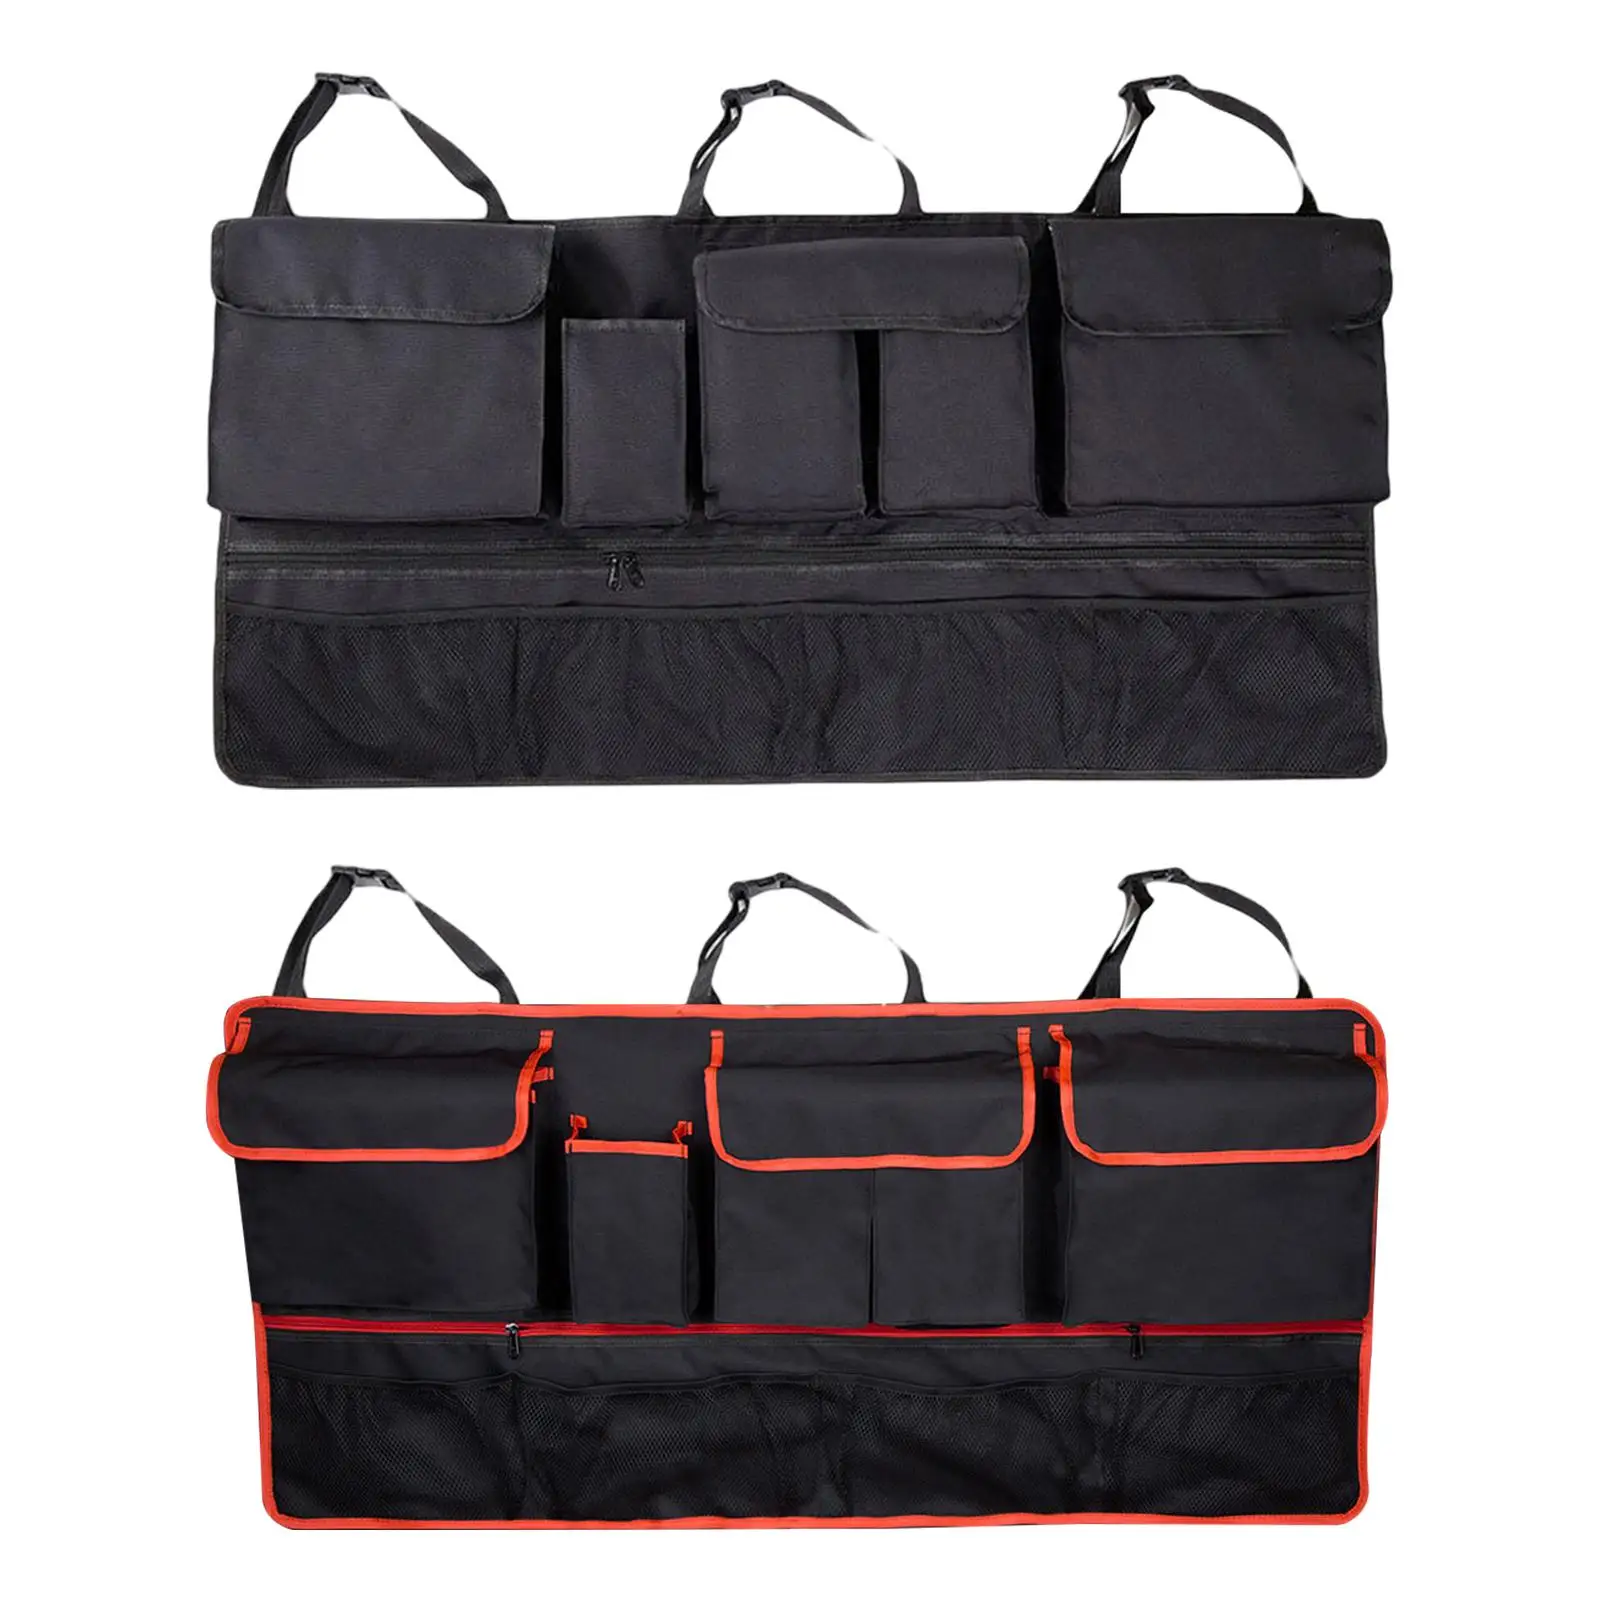 Car Backseat Hanging Trunk Organizer Bag for Cars Stowing and Tidying